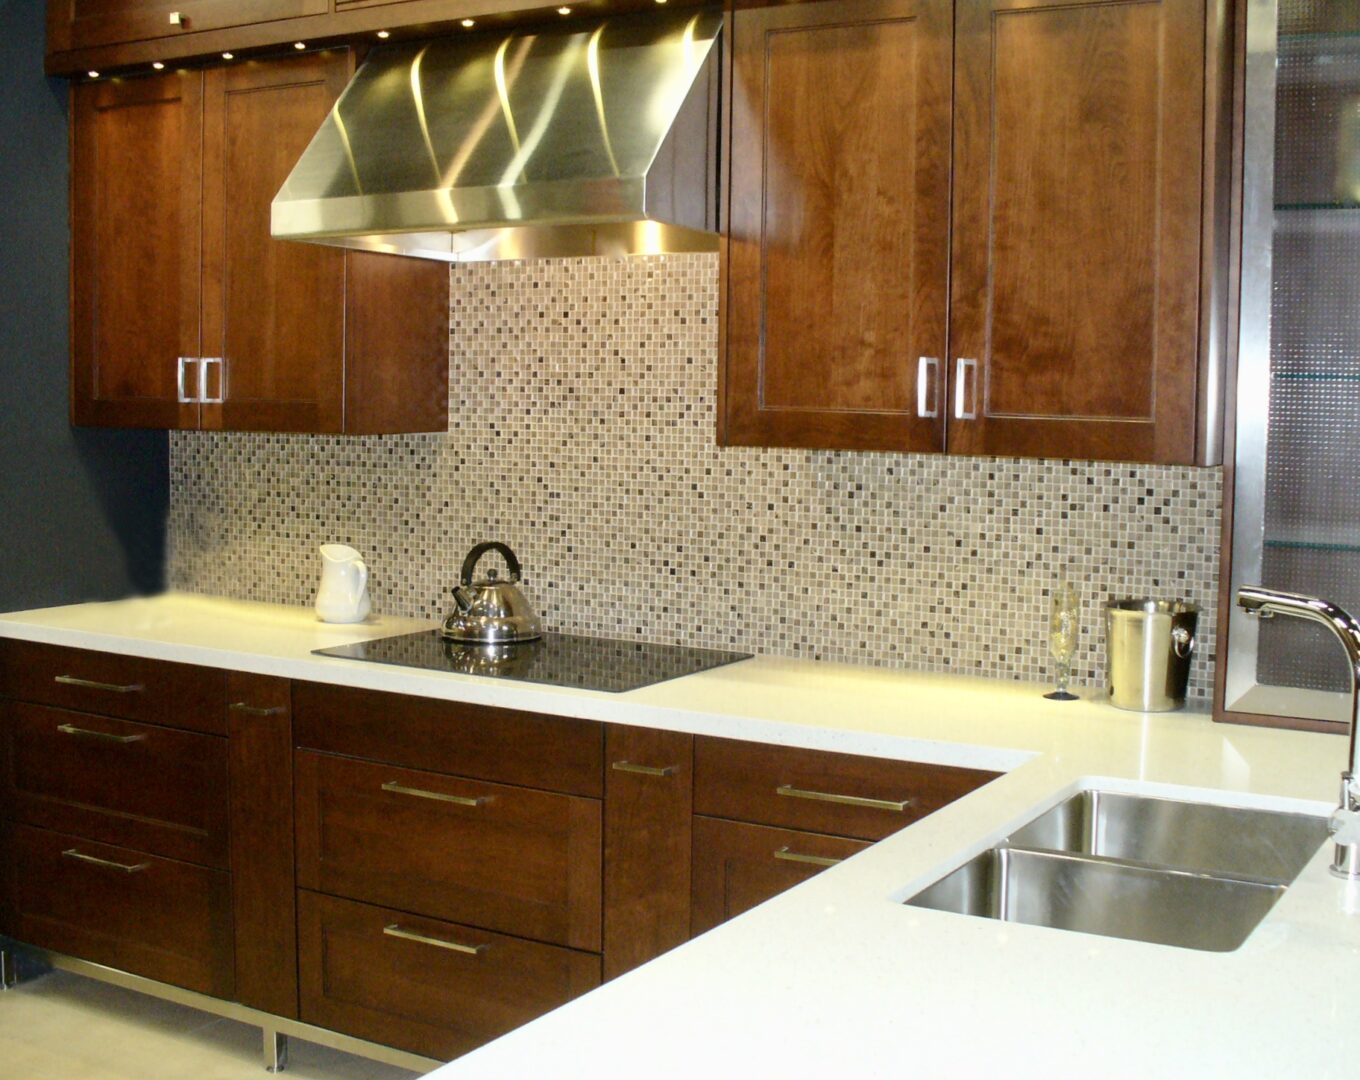 A customized kitchen with chimney and basin